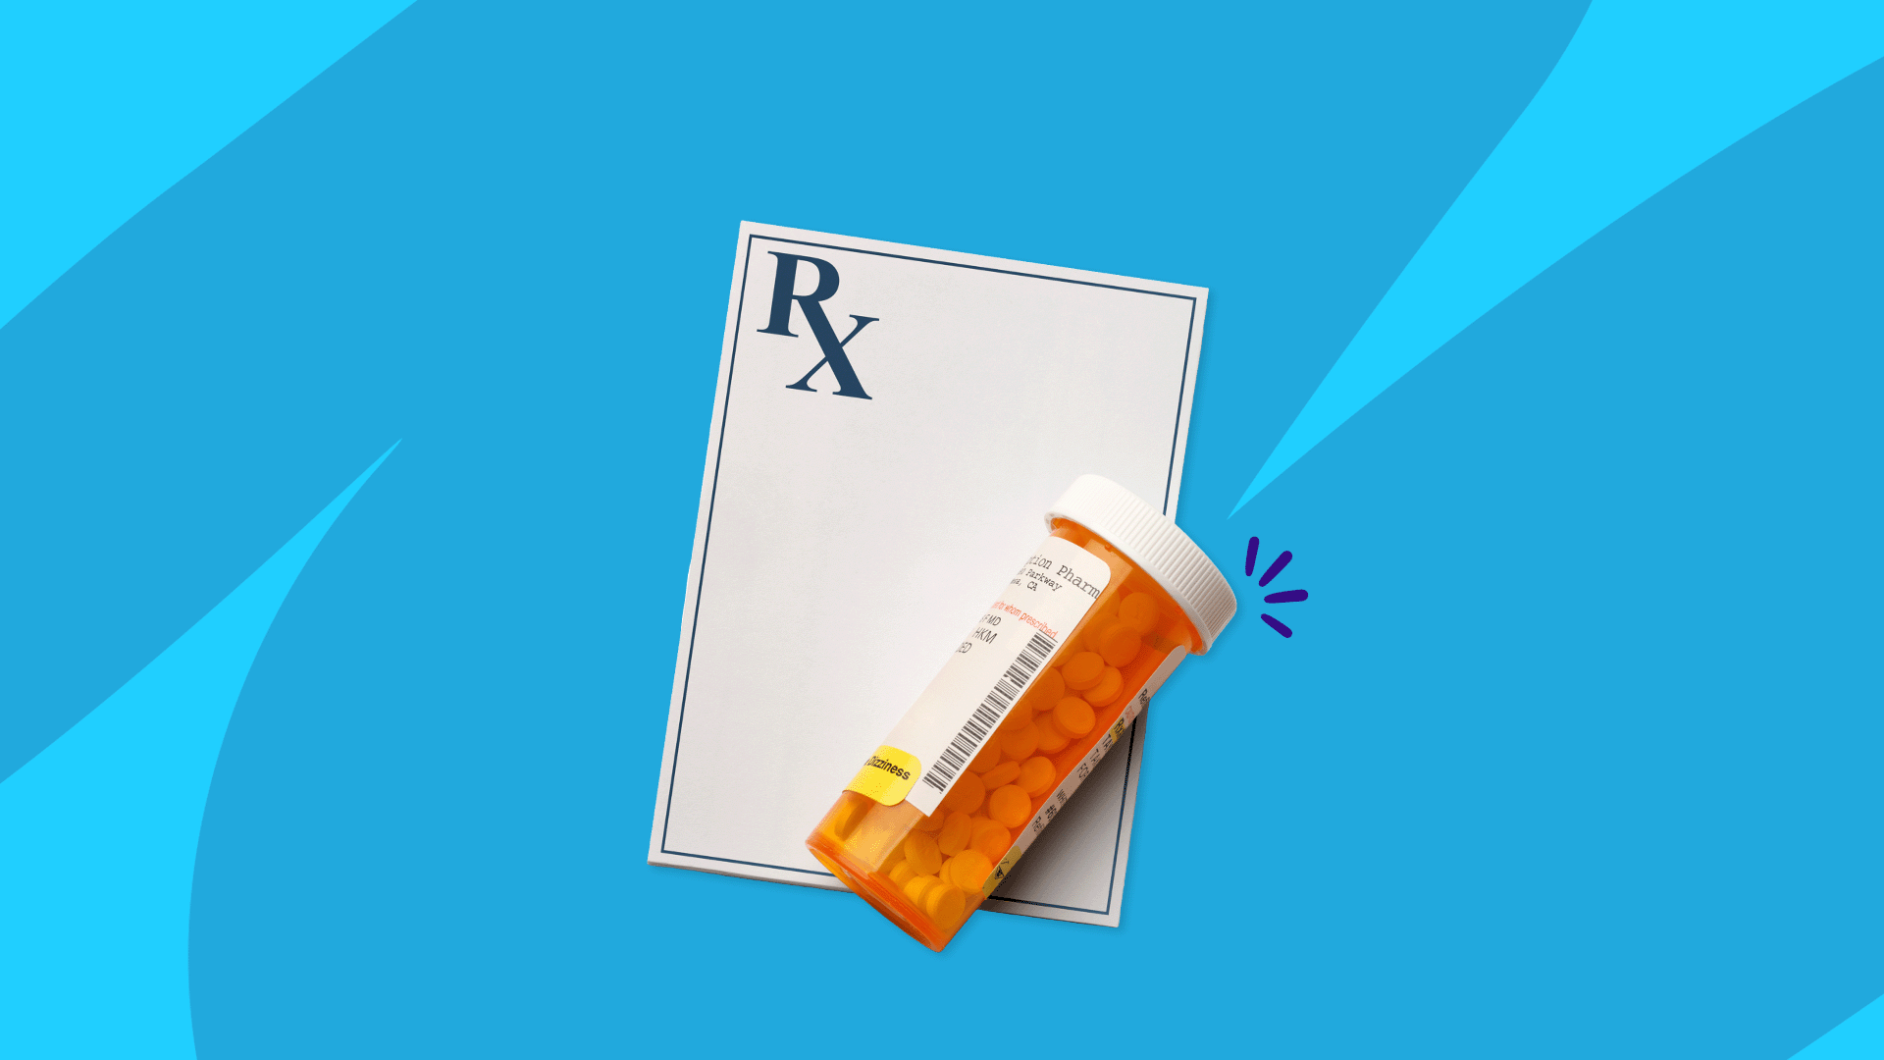 Rx prescription pad and Rx pill bottle: Contrave side effects and how to avoid them